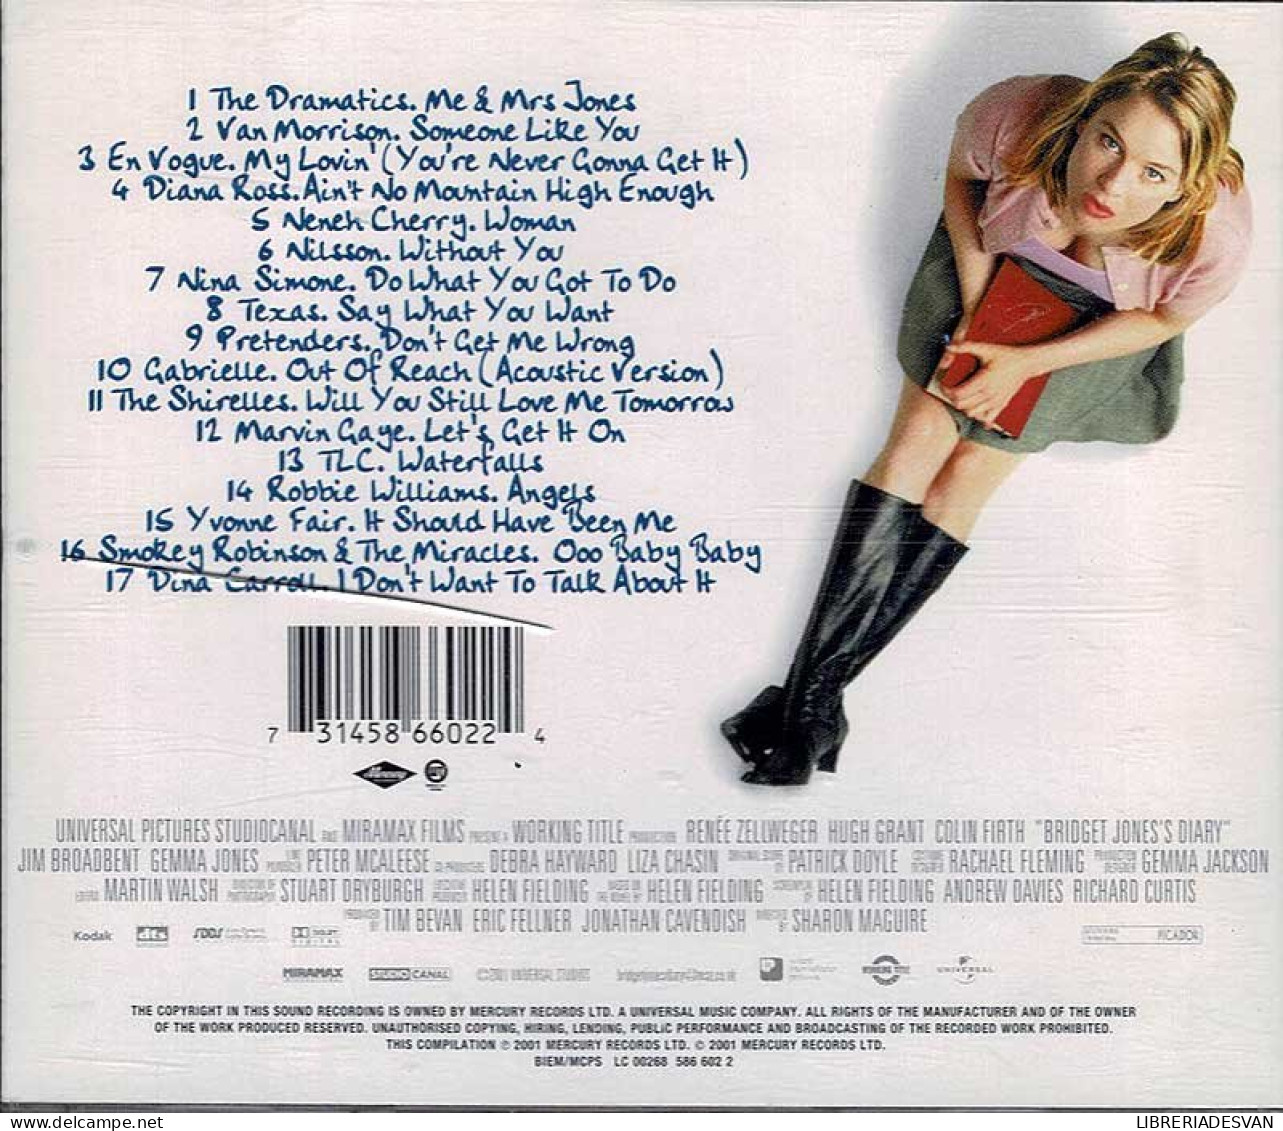 Bridget Jones's Diary 2 (More Music From The Motion Picture & Other V. G. Songs). CD - Musique De Films